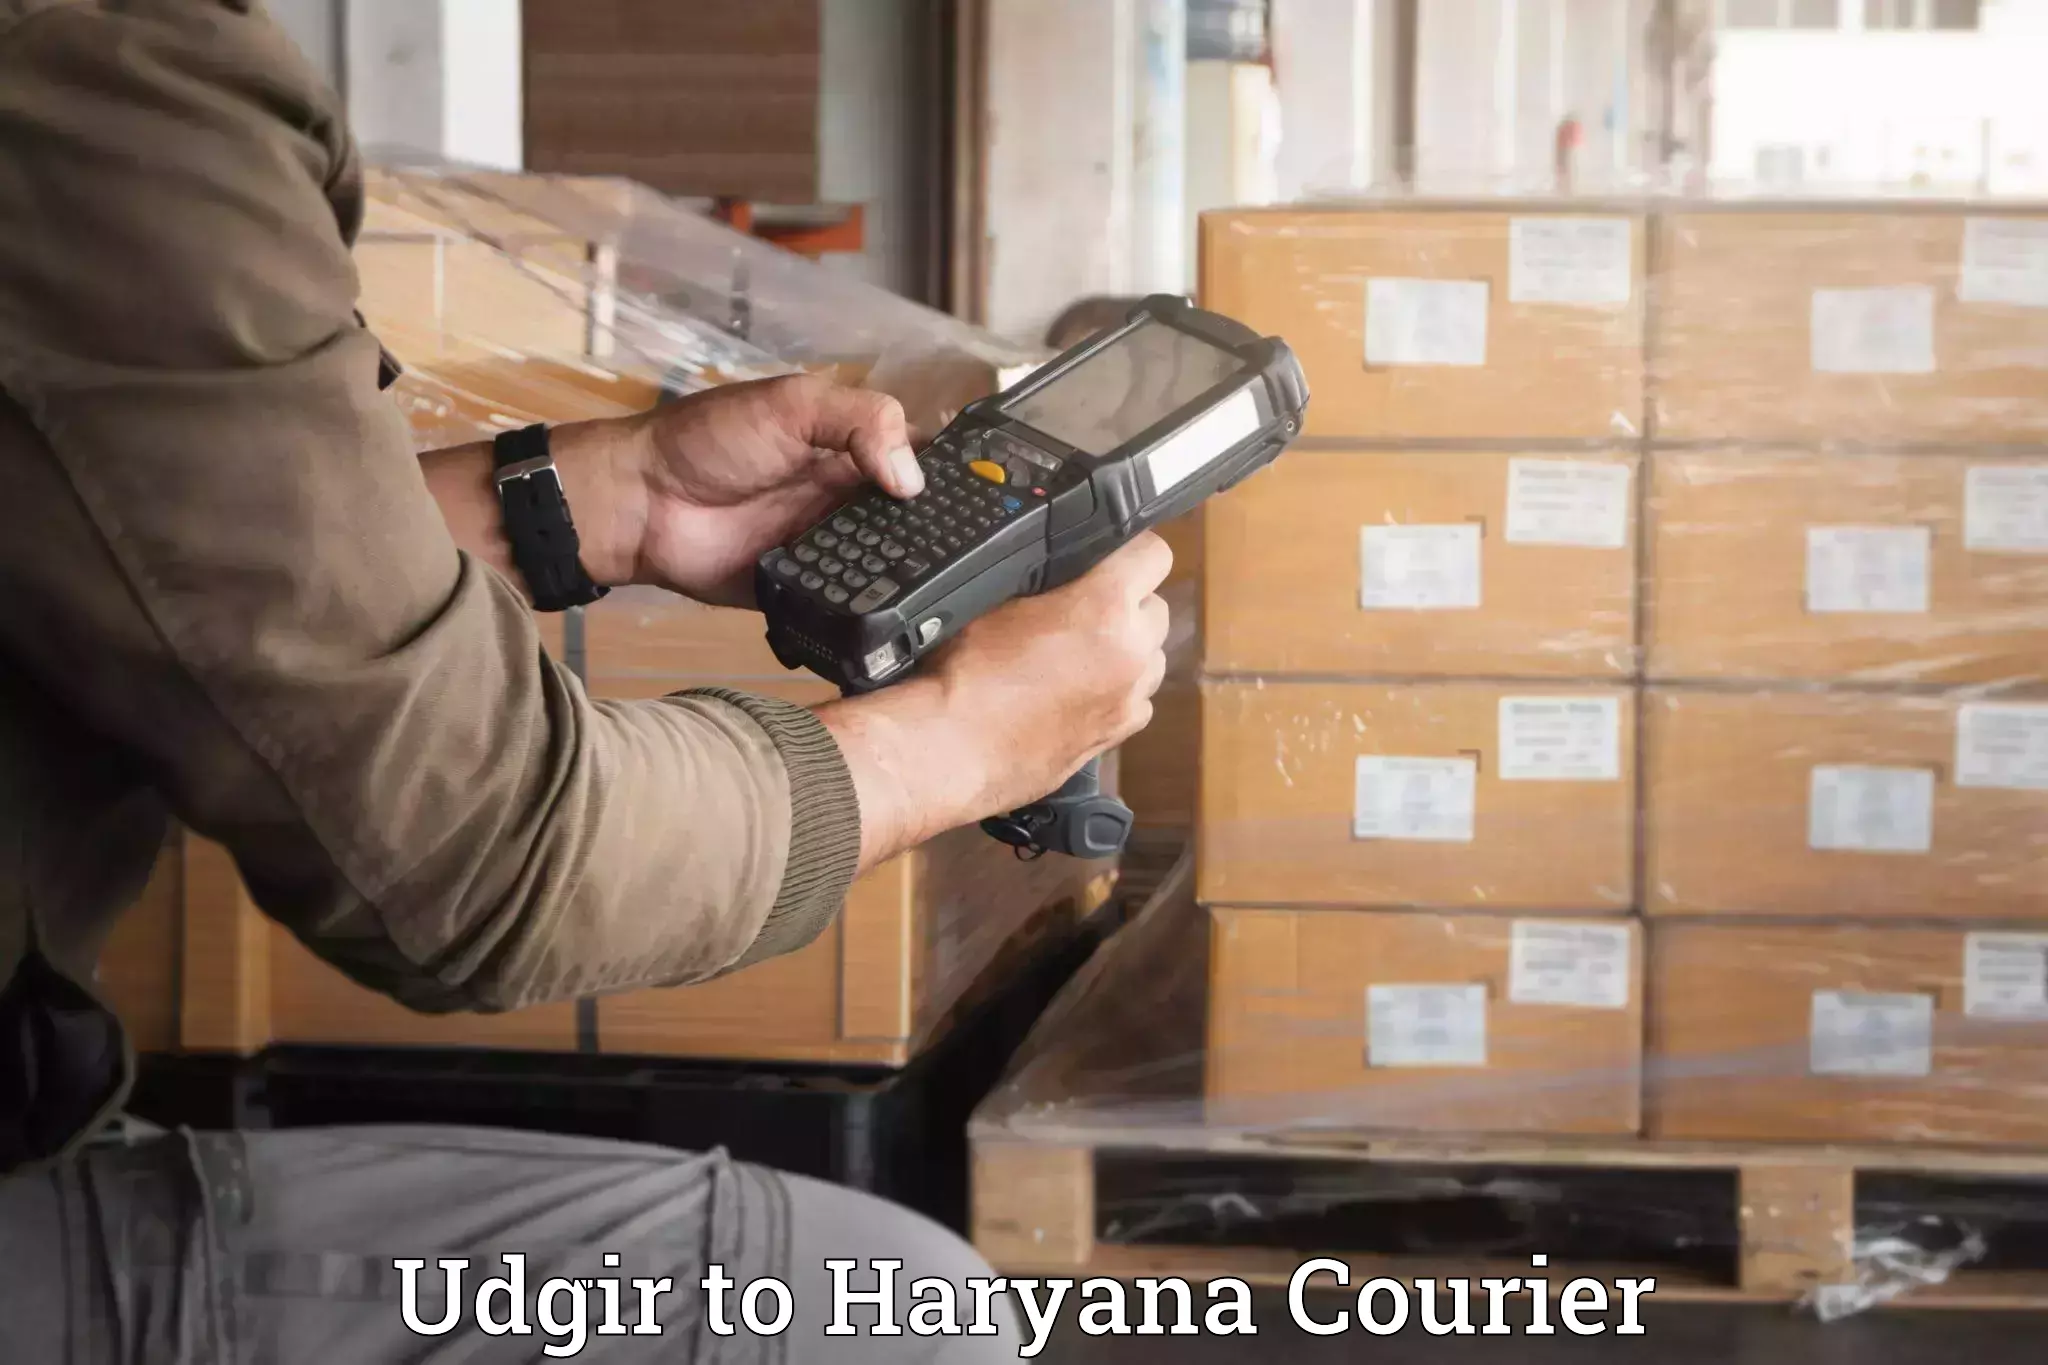 Luggage transport consultancy Udgir to Haryana